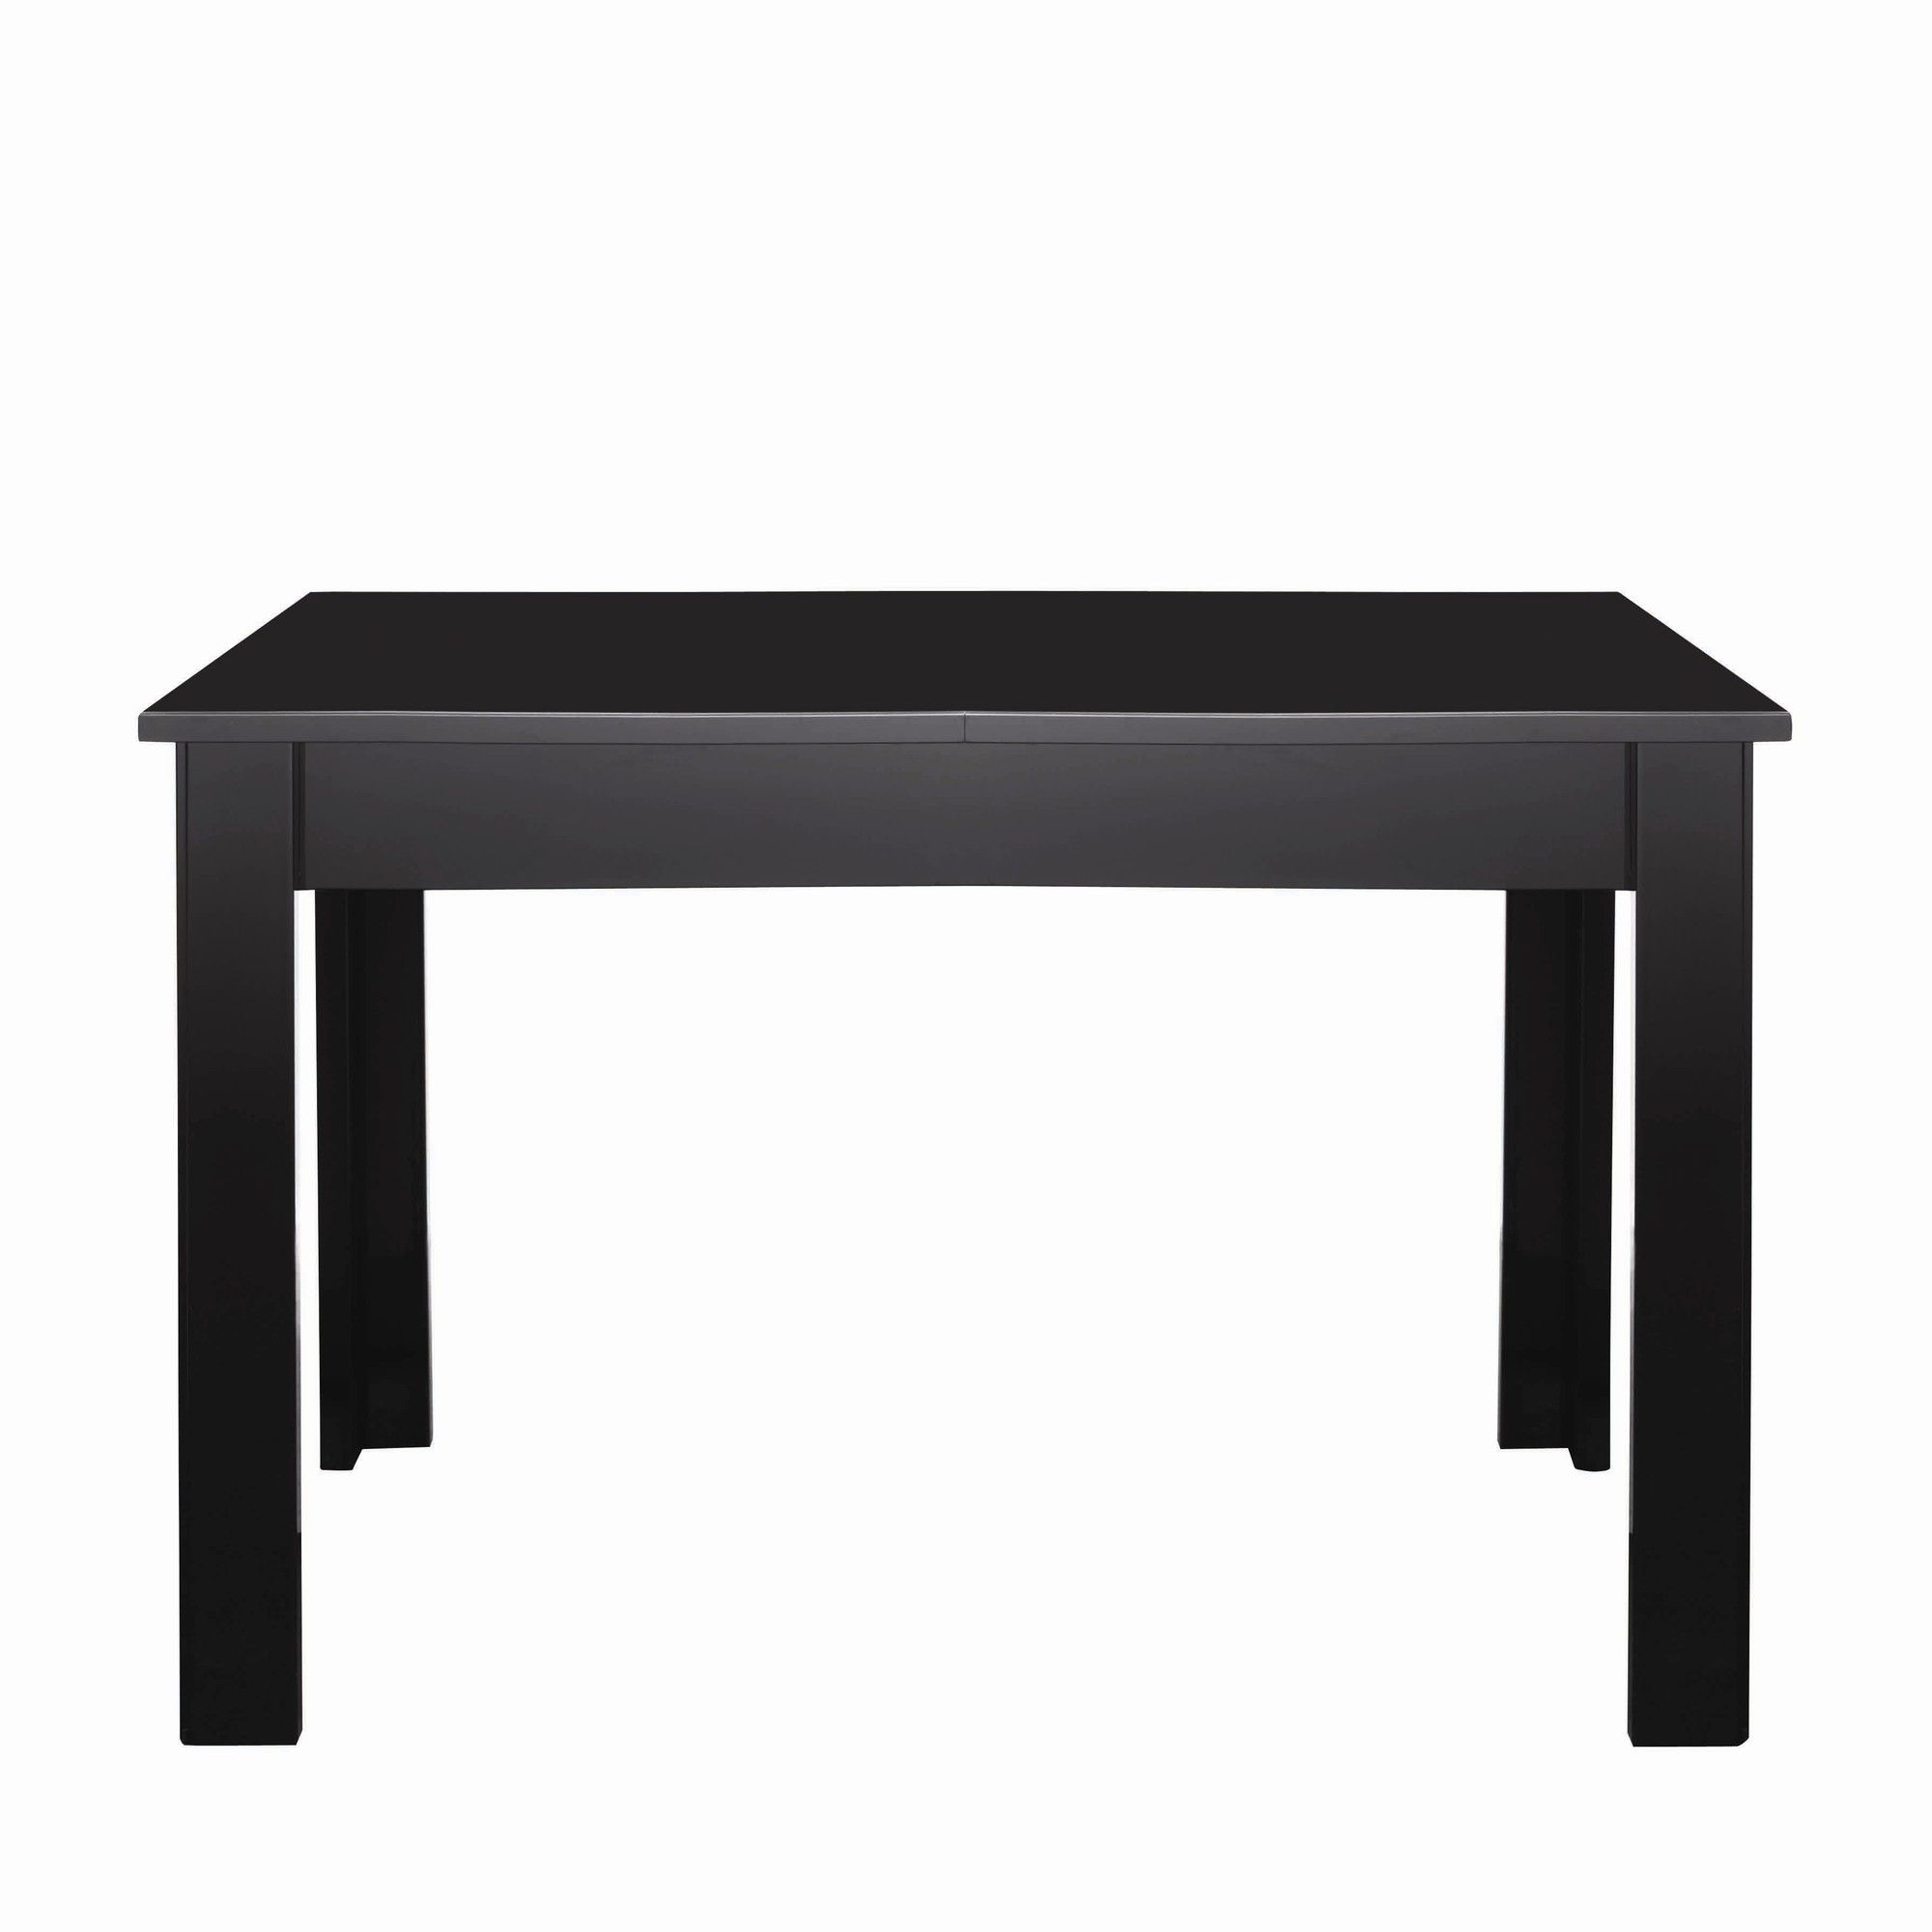 Caxton Manhattan Table with 4 Chairs in Black Gloss at Tescos Direct